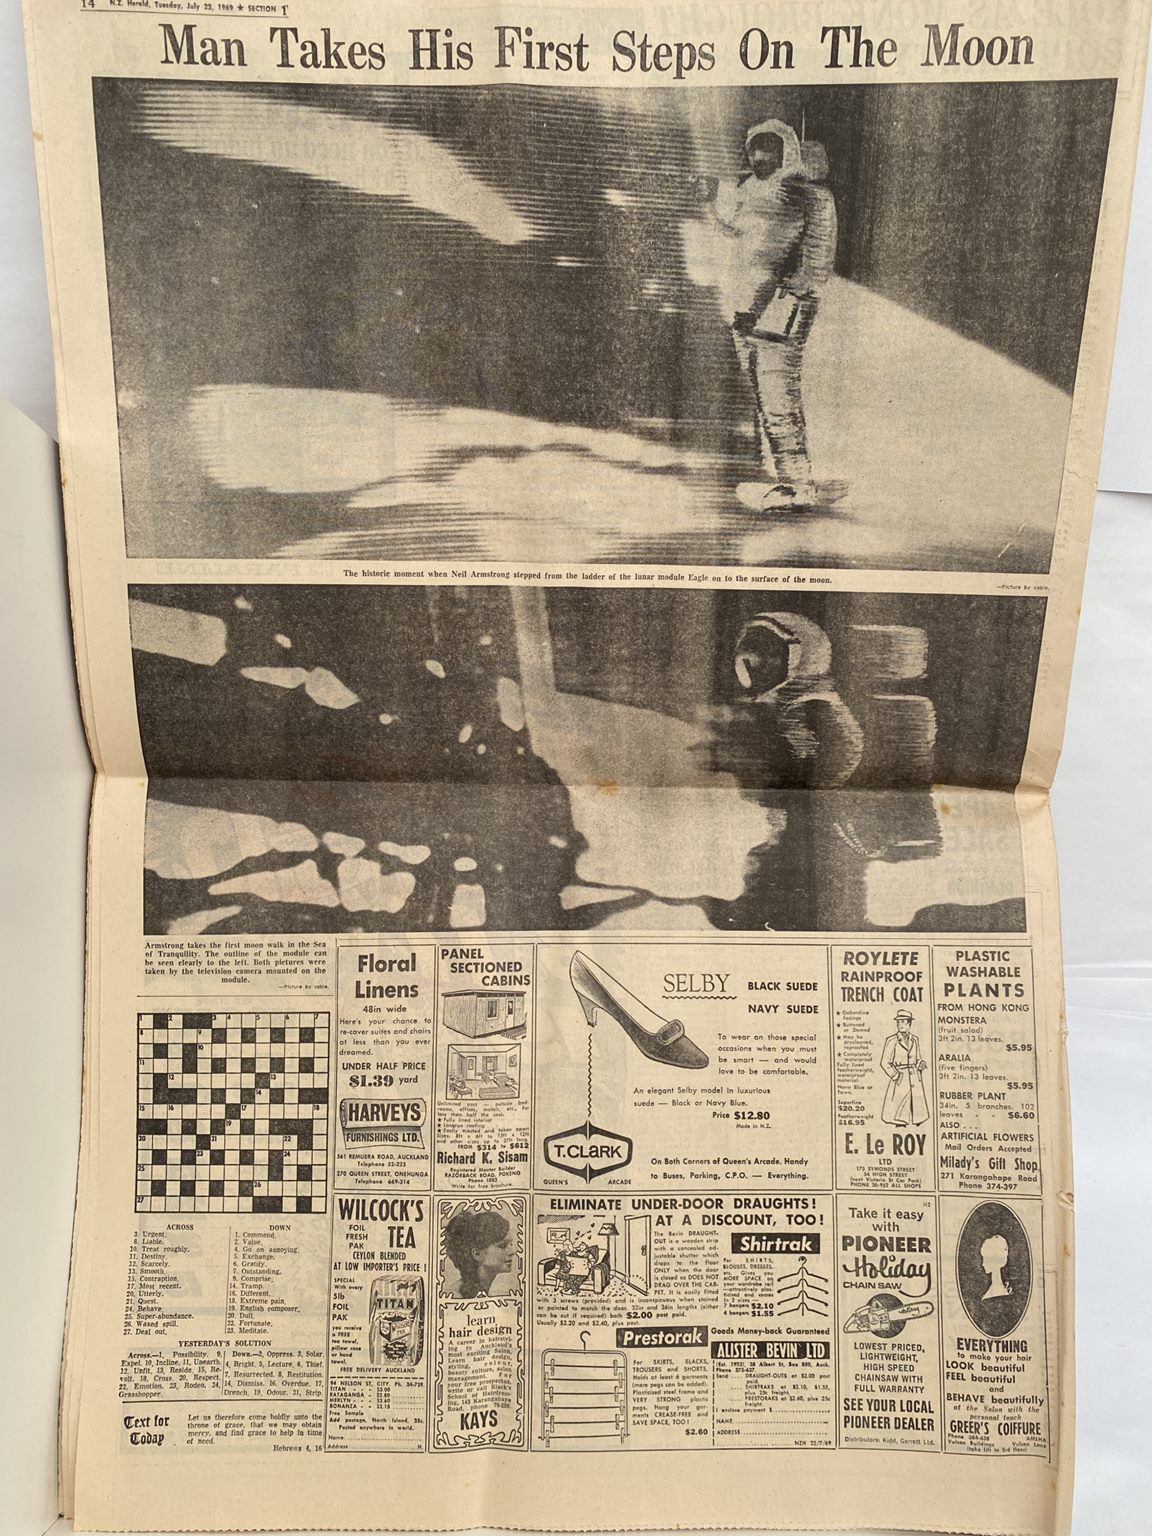 OLD NEWSPAPER: The New Zealand Herald, 22 July 1969 - Moon Landing Special